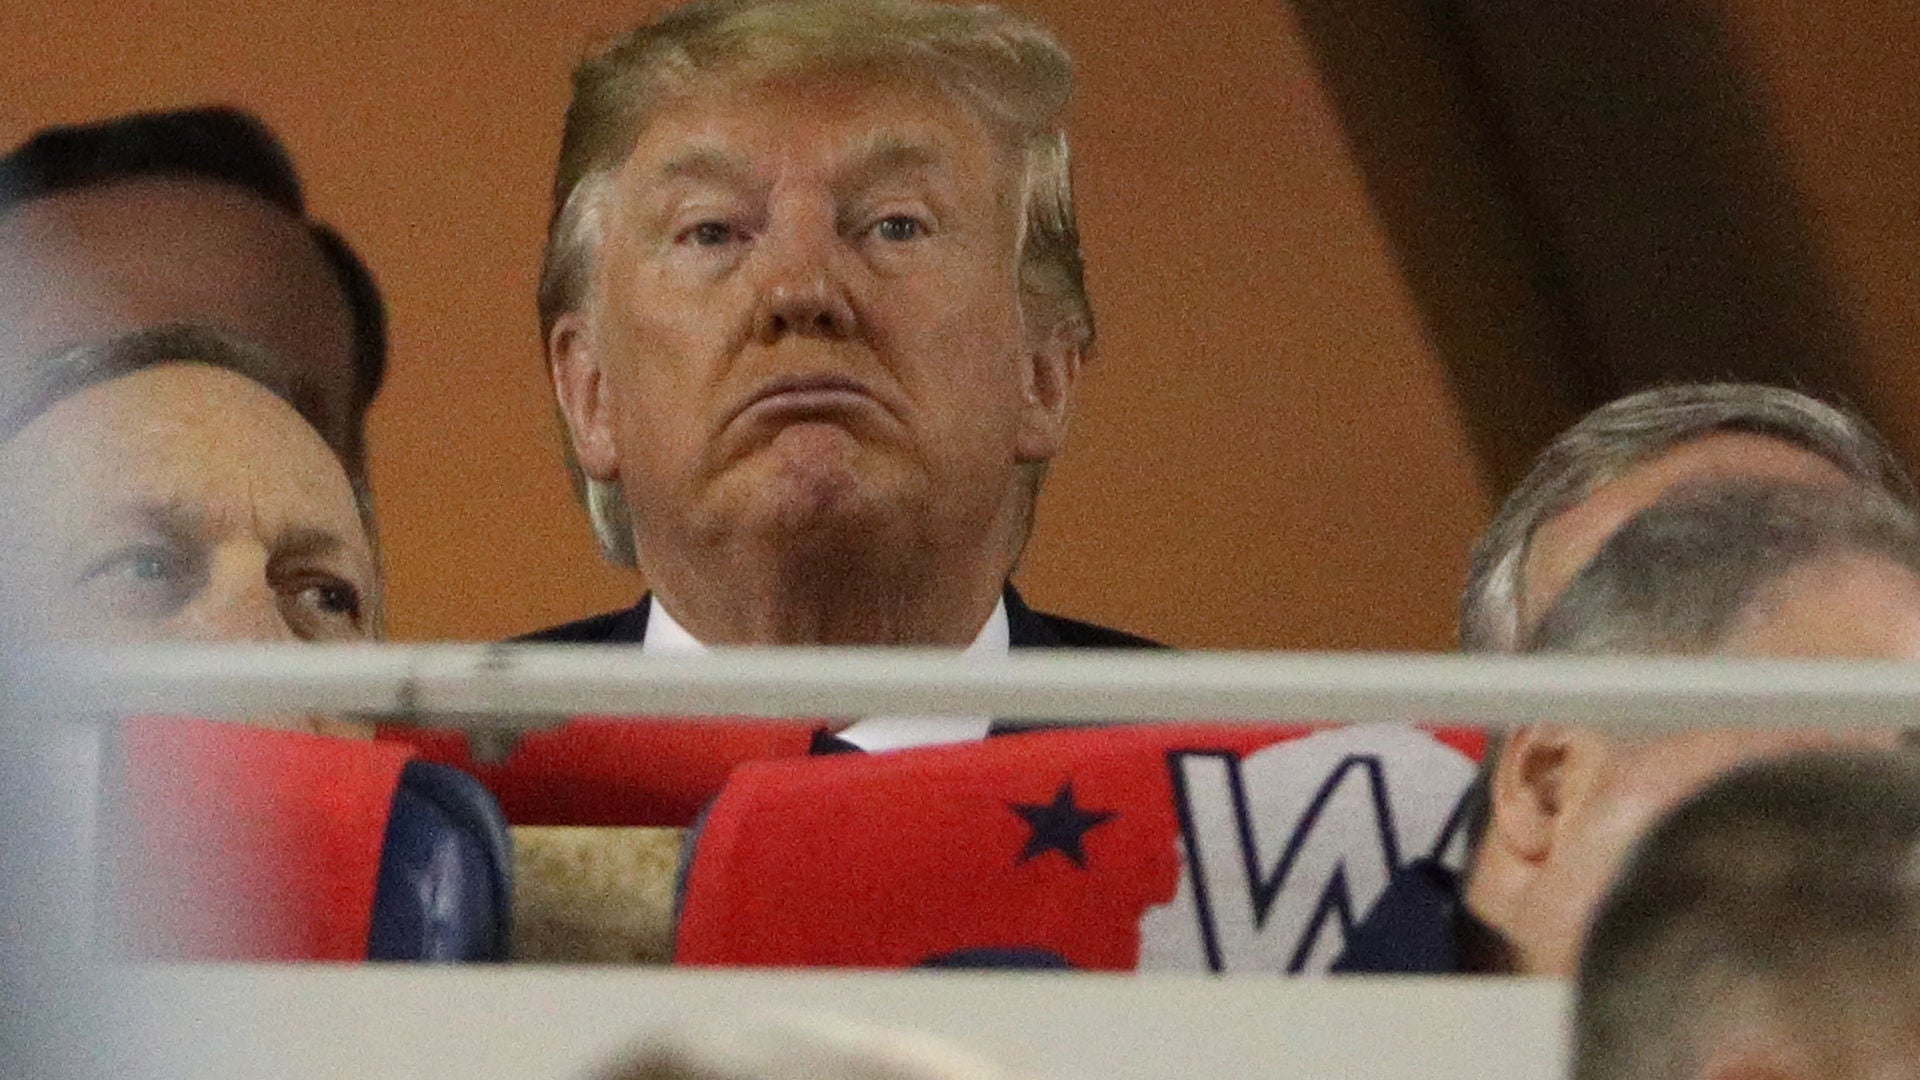 Trump Greeted With Boos At World Series Game